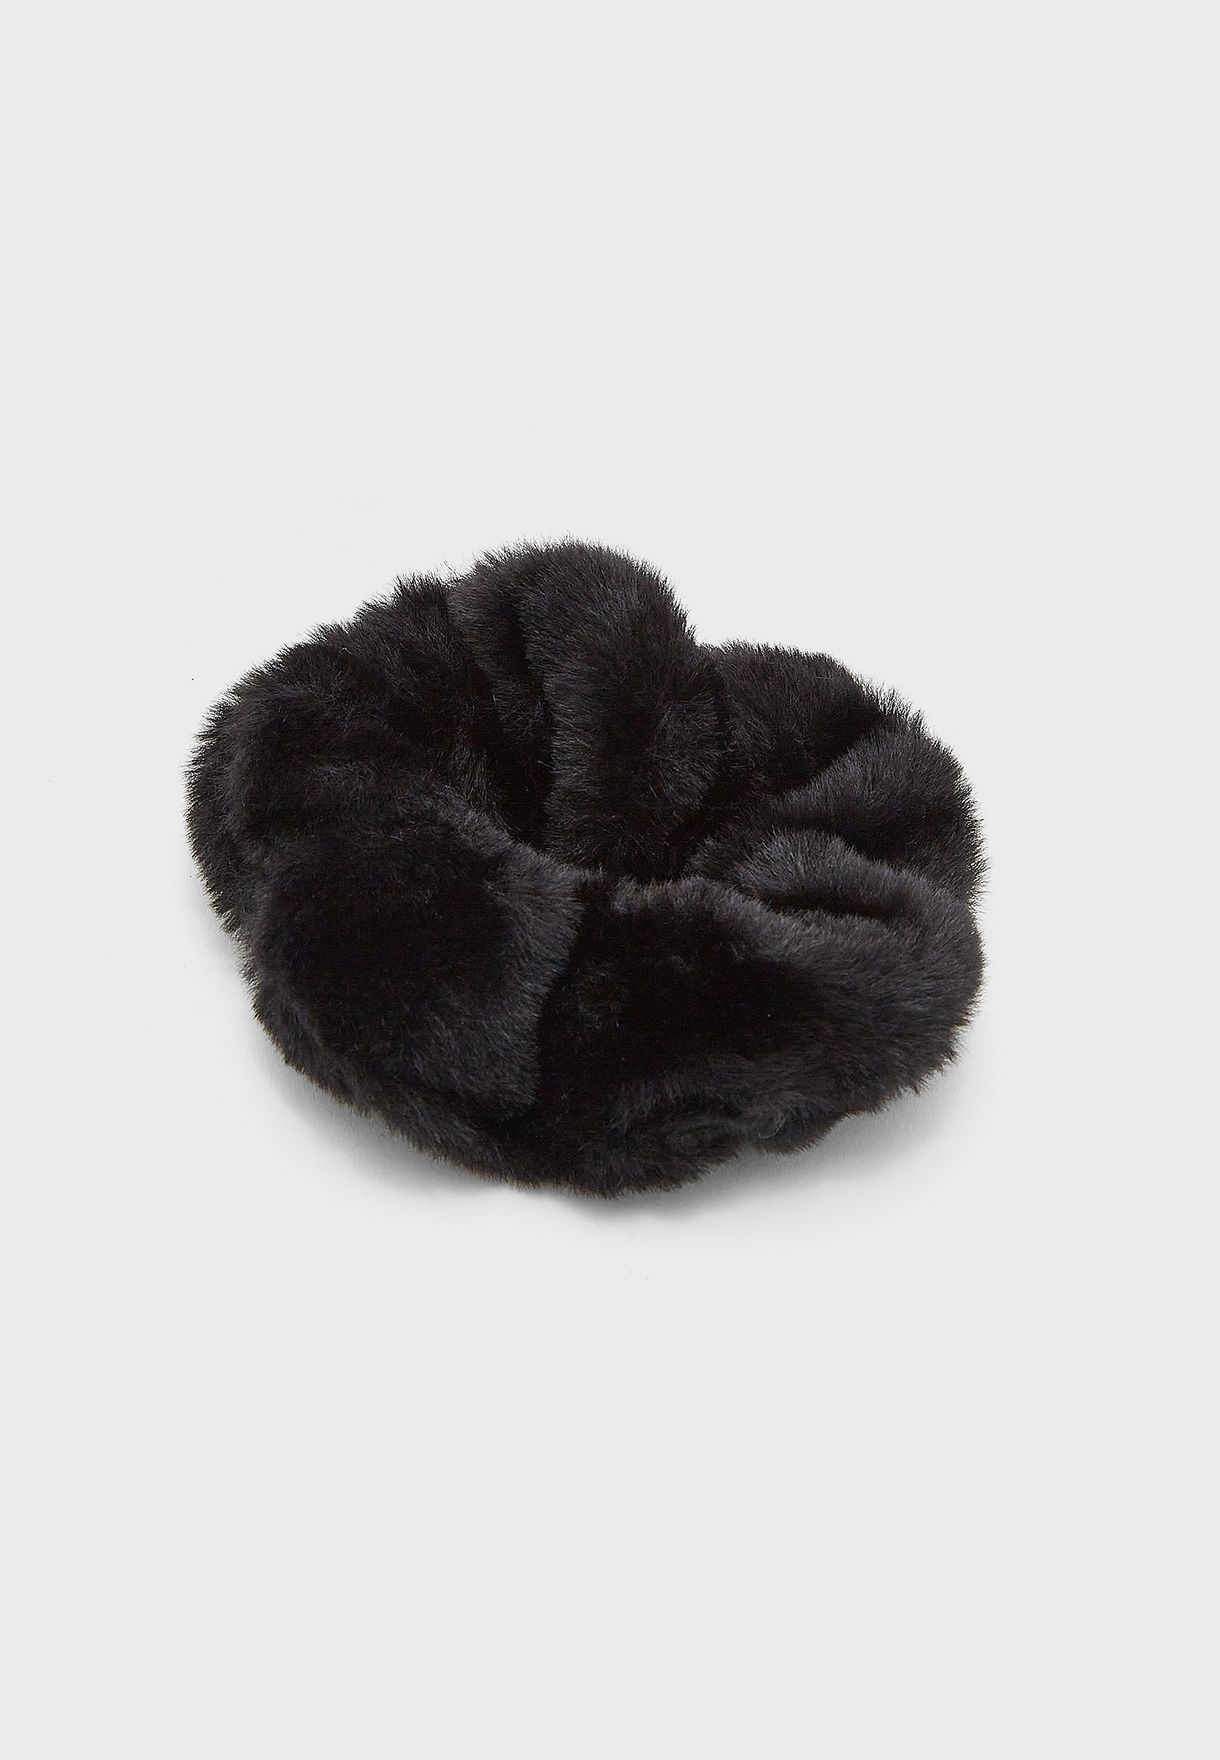 Furry Bedroom Slippers, Eye Cover And Scrunchie Gift Set 